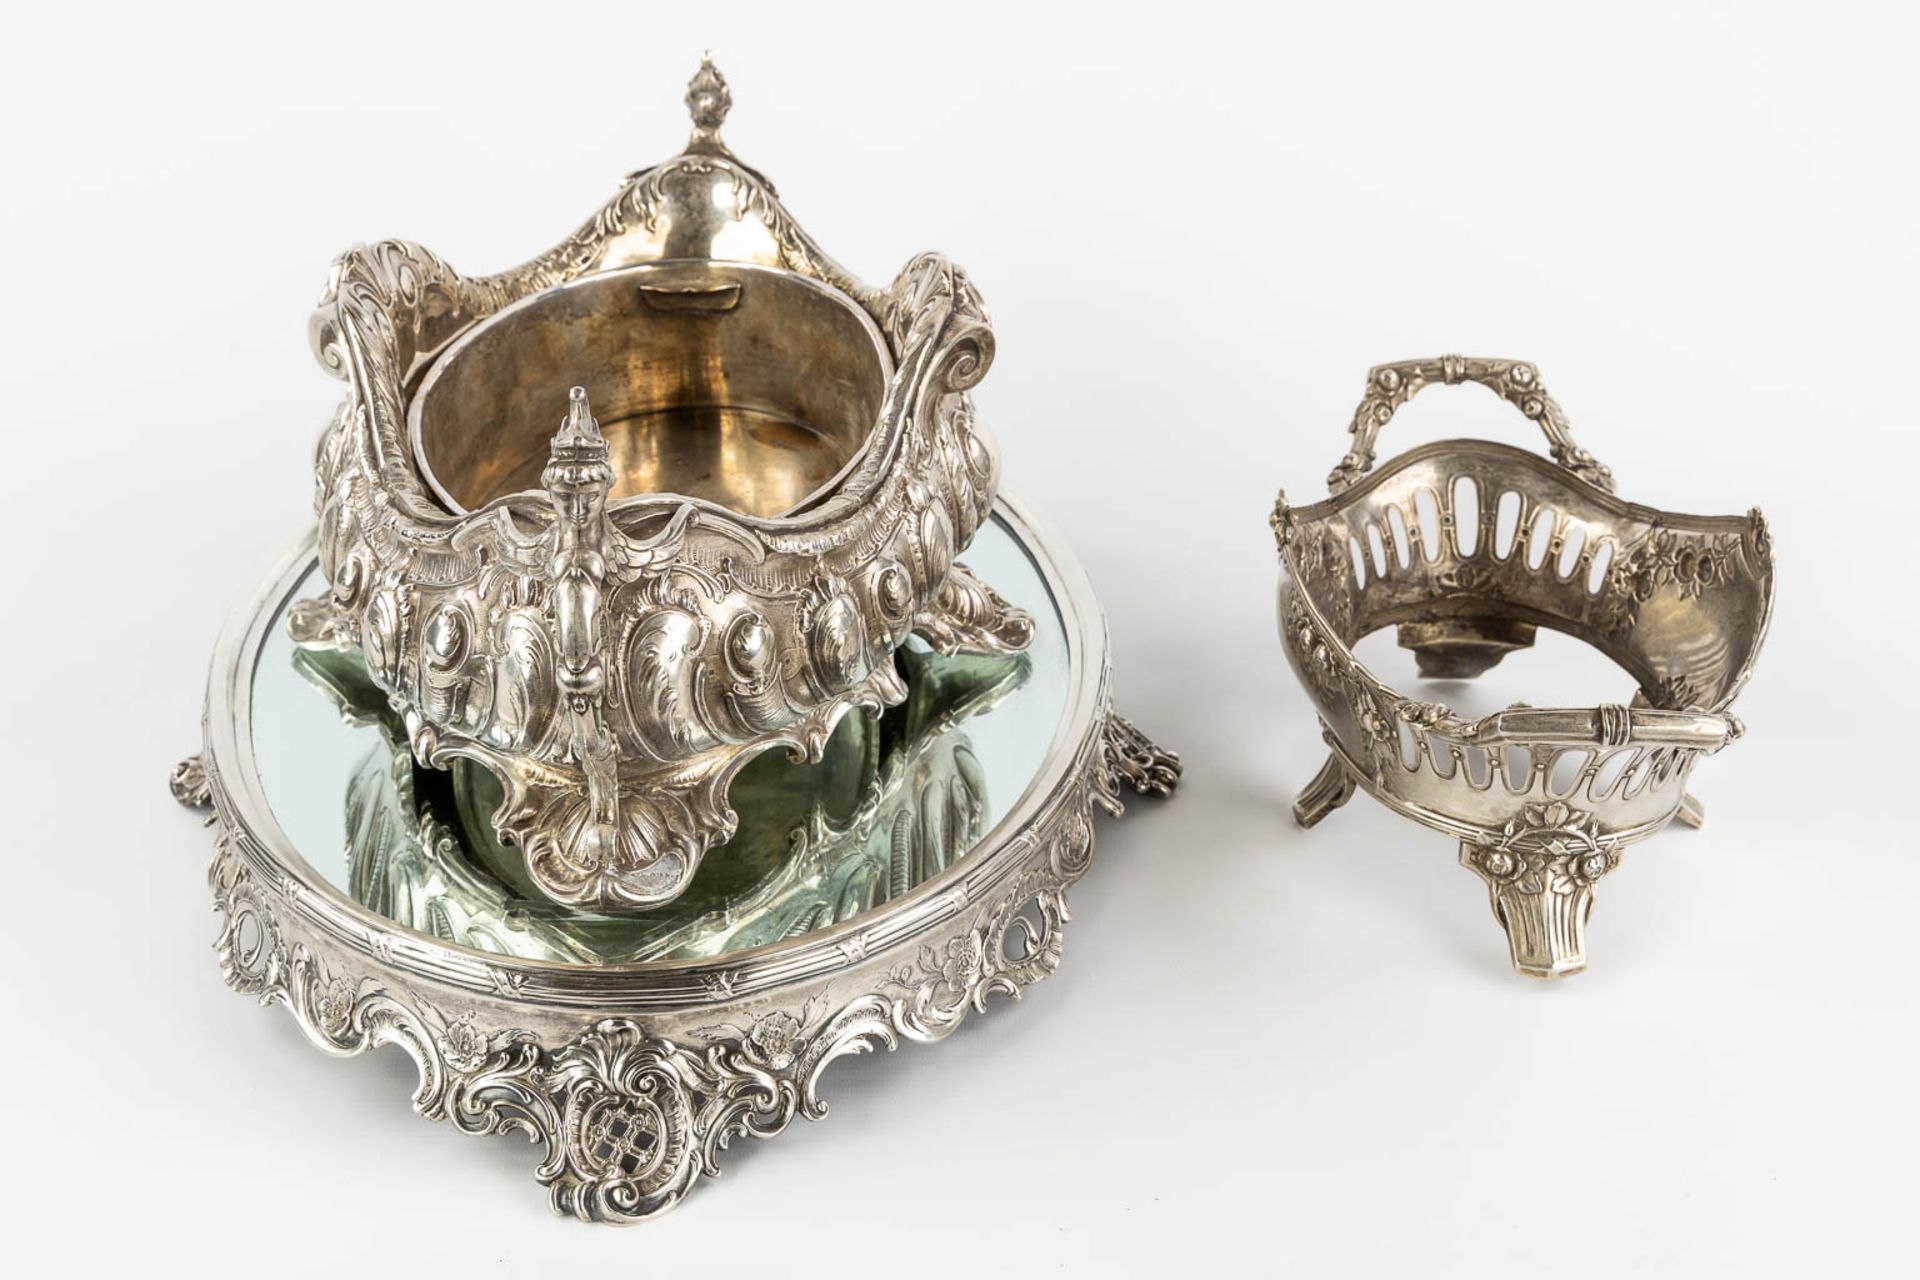 A large table centerpiece, silver, Germany. Added a basket. Circa 1900. (L:38 x W:54 x H:23 cm) - Image 6 of 12